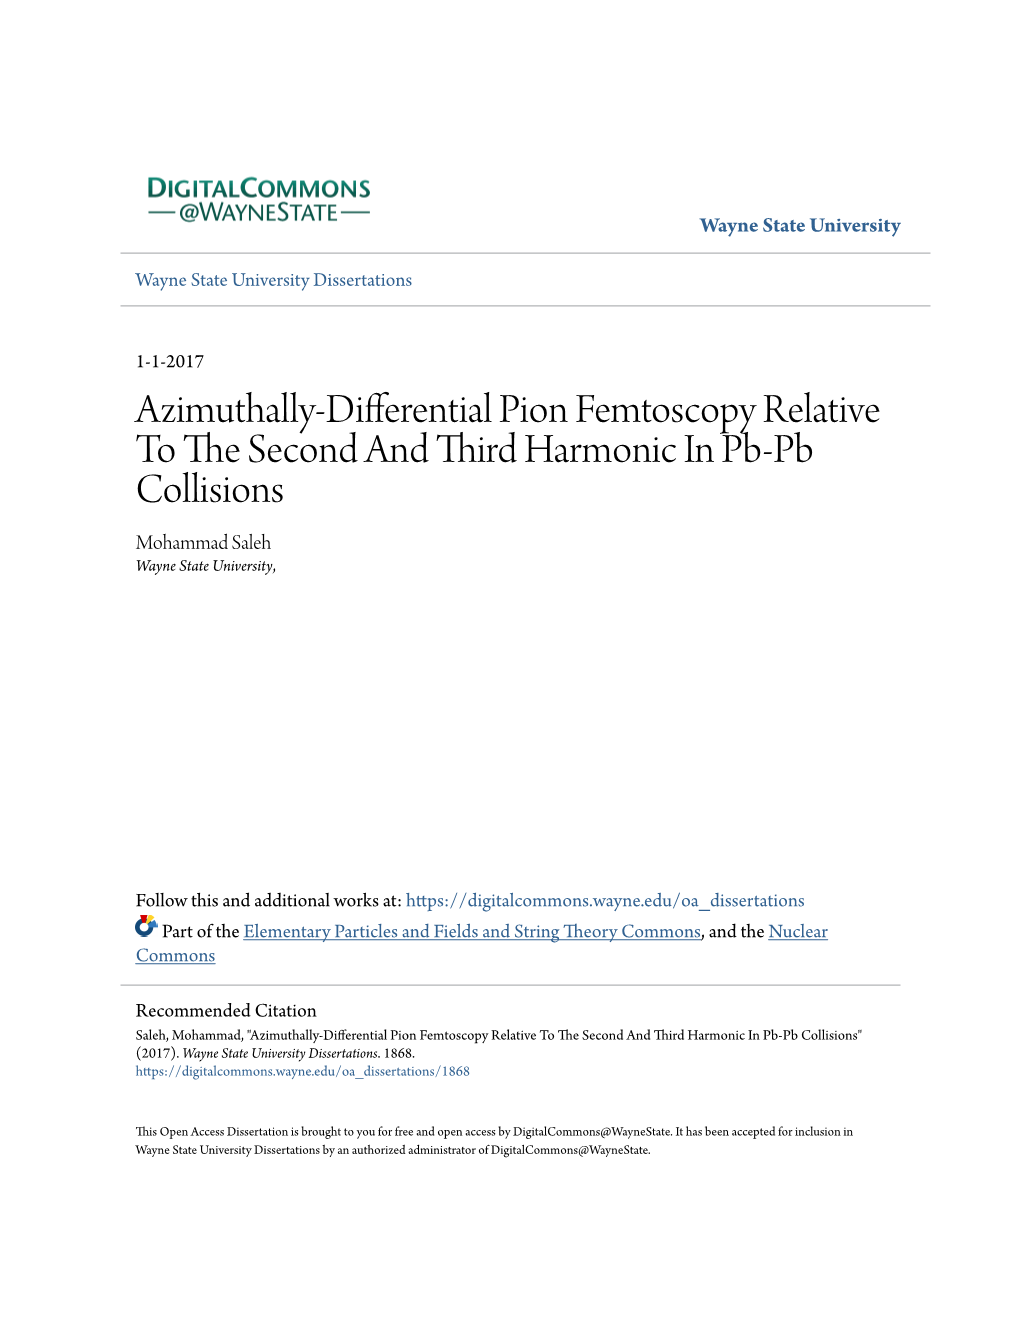 Azimuthally-Differential Pion Femtoscopy Relative to the Econds and Third Harmonic in Pb-Pb Collisions Mohammad Saleh Wayne State University